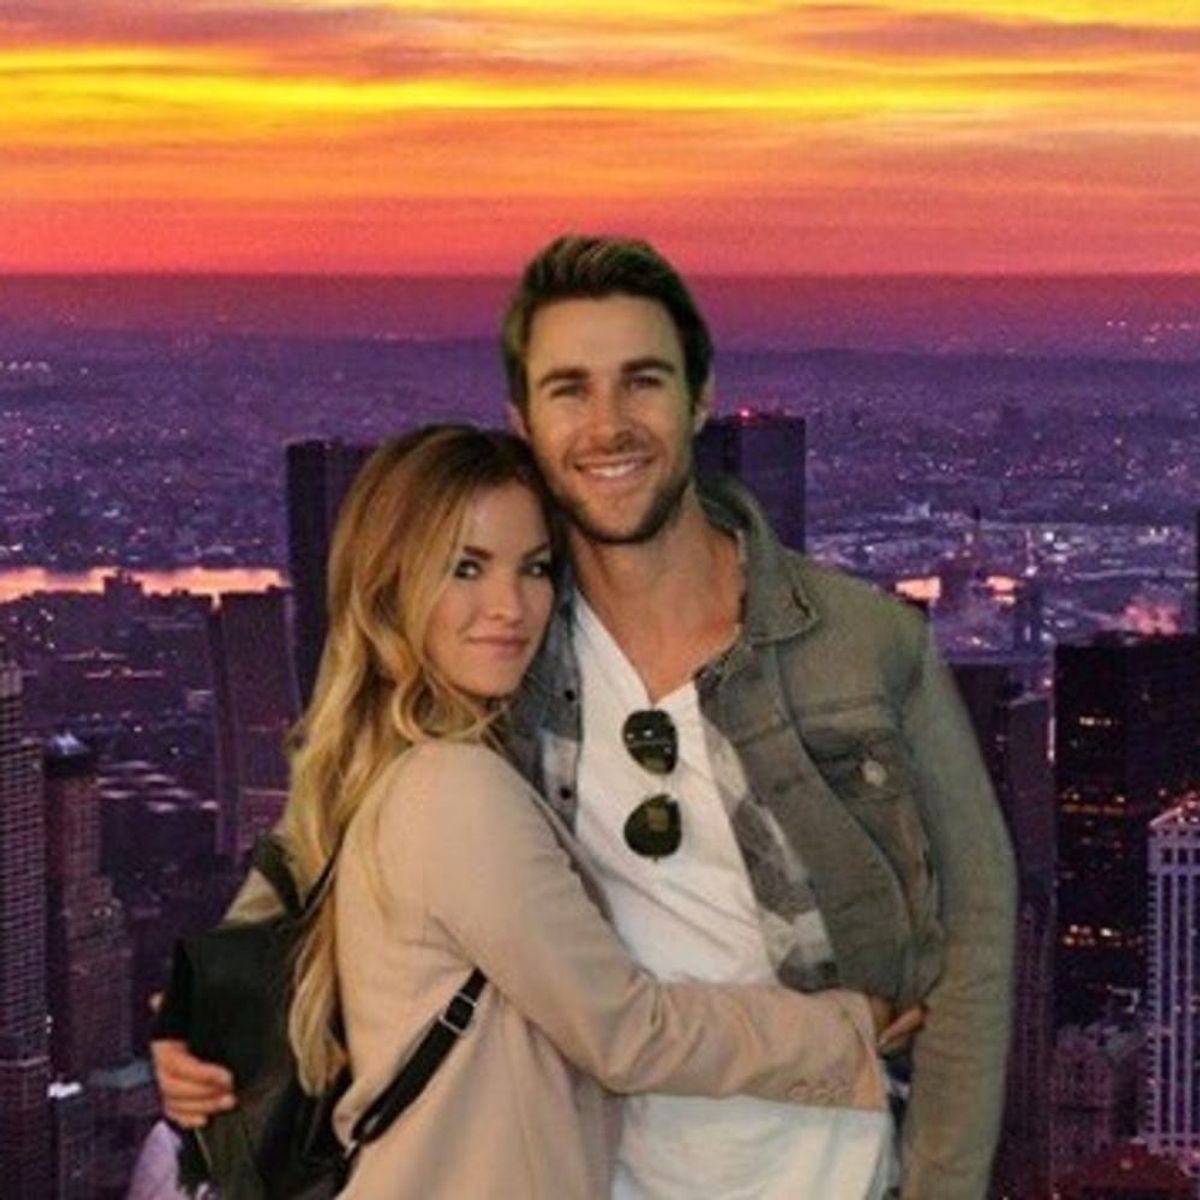 This Unexpected Bachelor Couple Just Made Their Relationship Instagram-Official